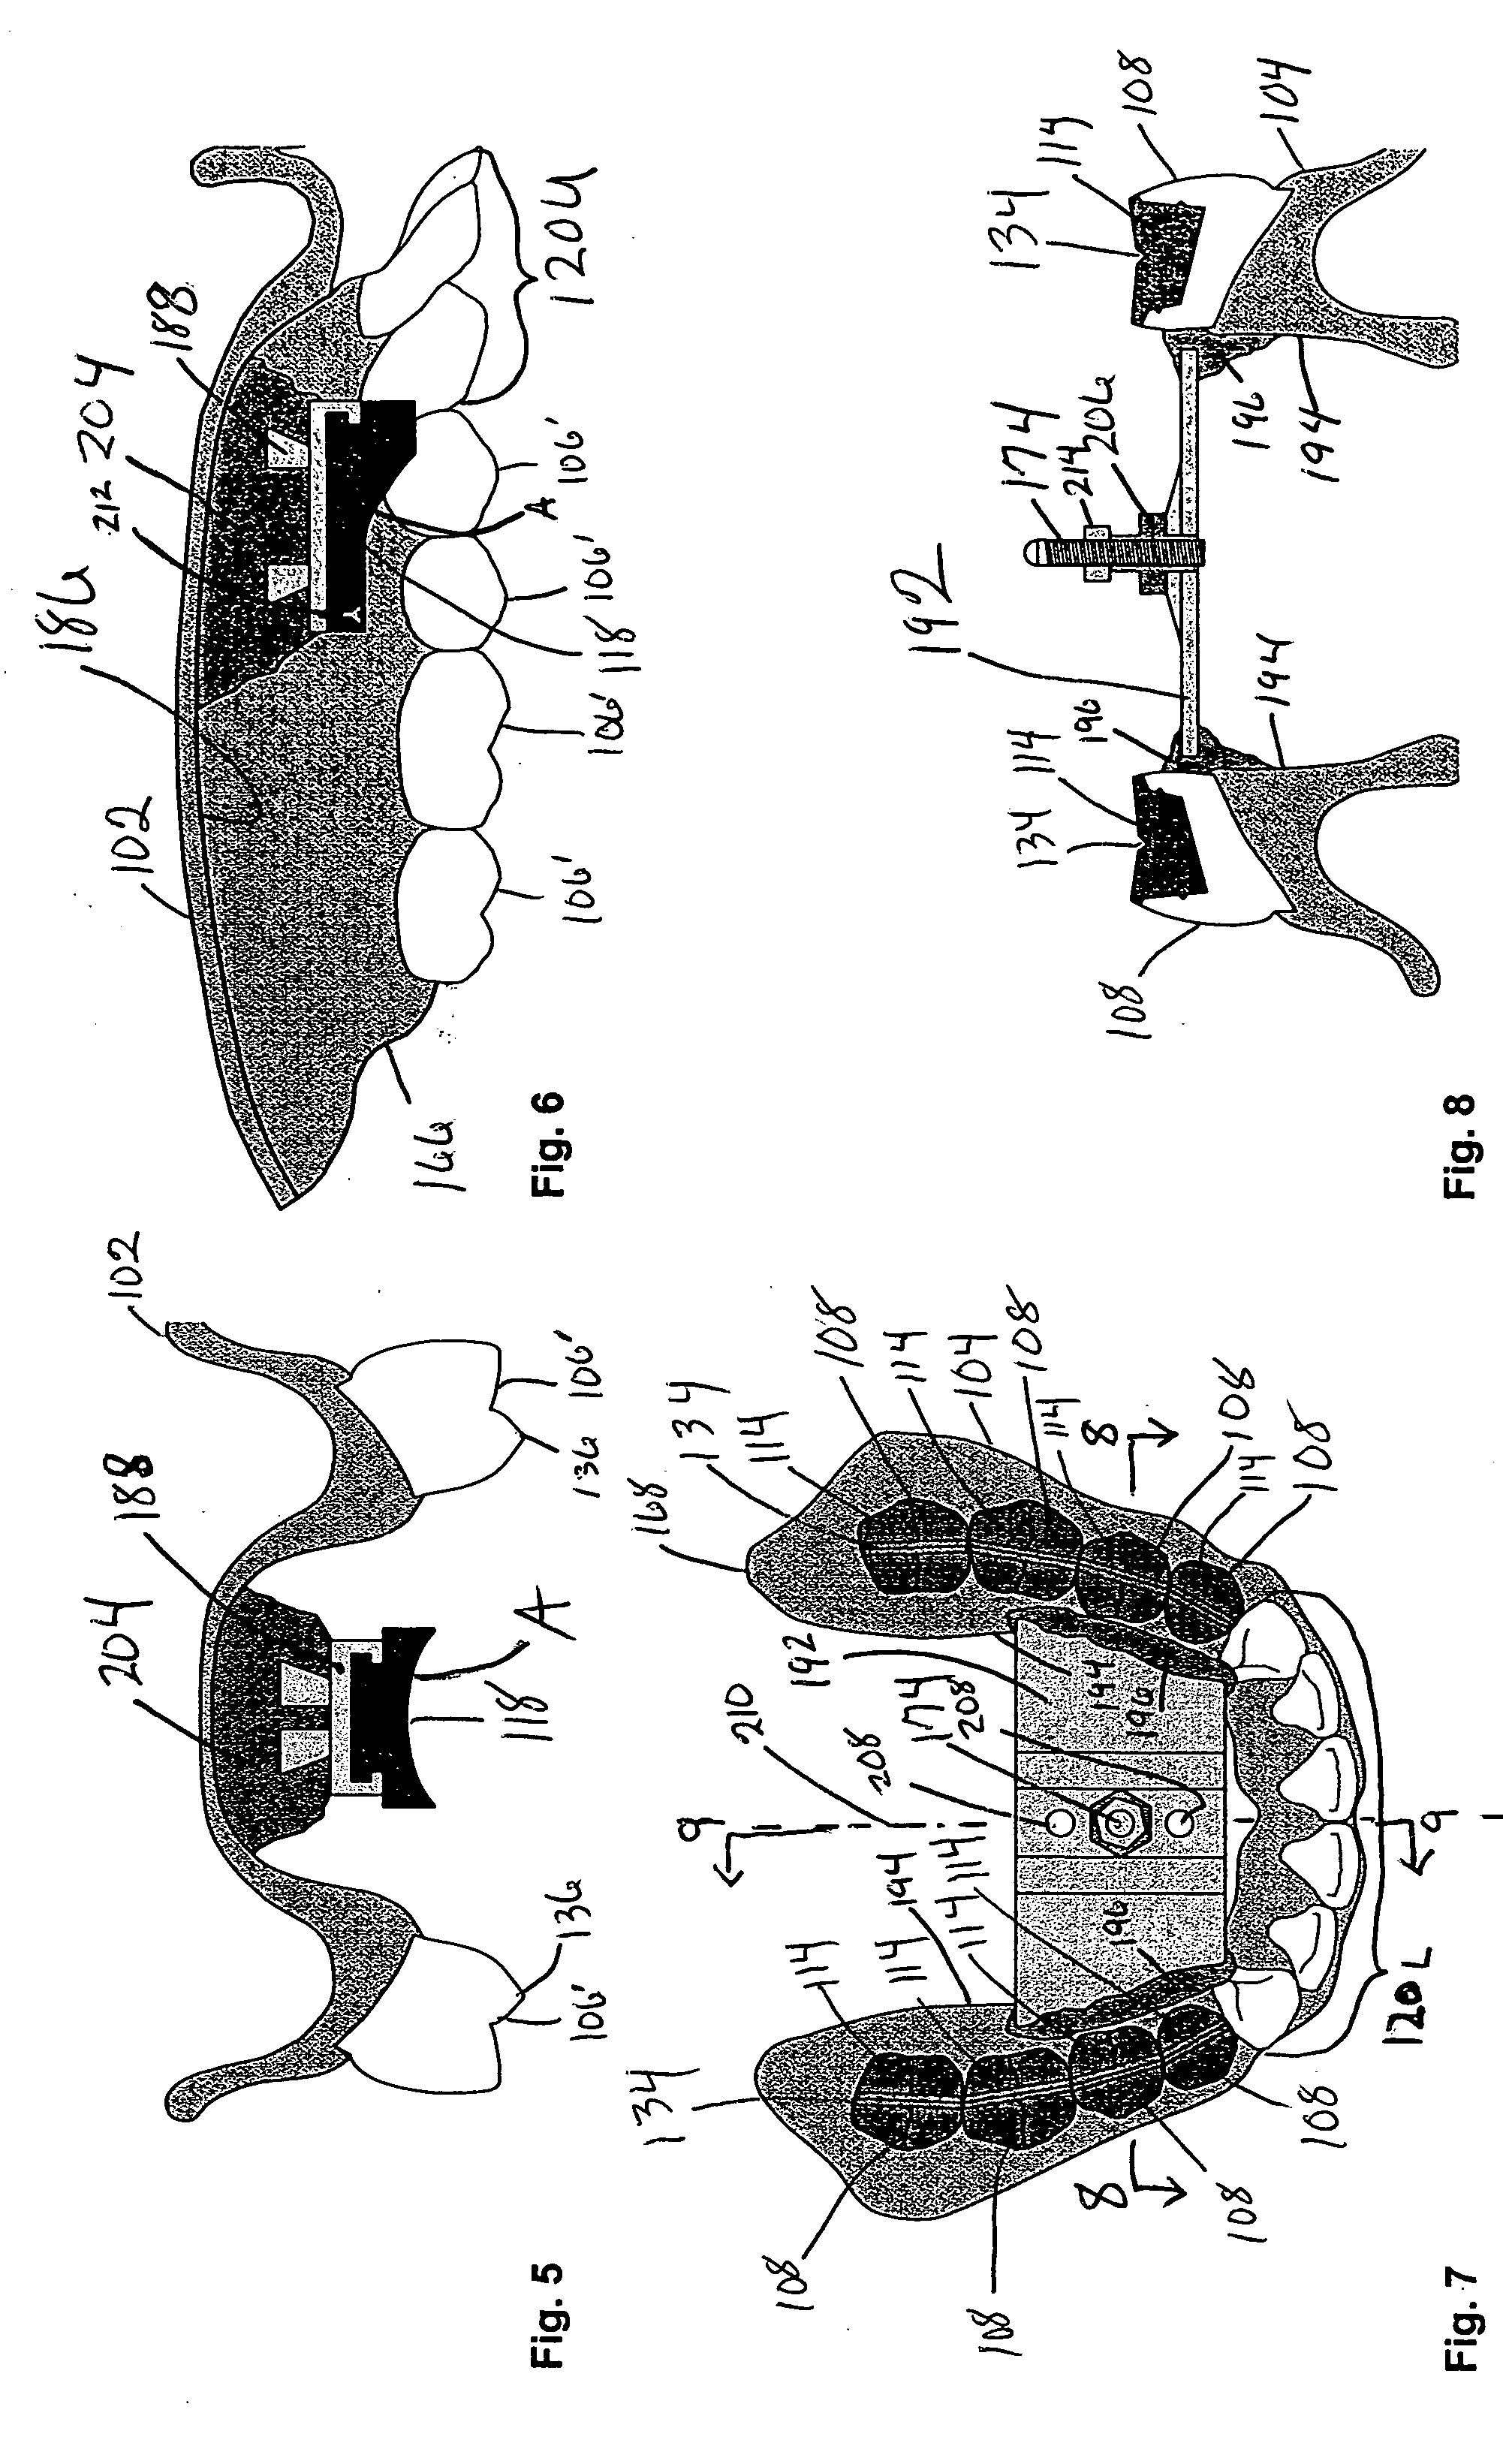 Method for developing balanced occlusion in dentistry